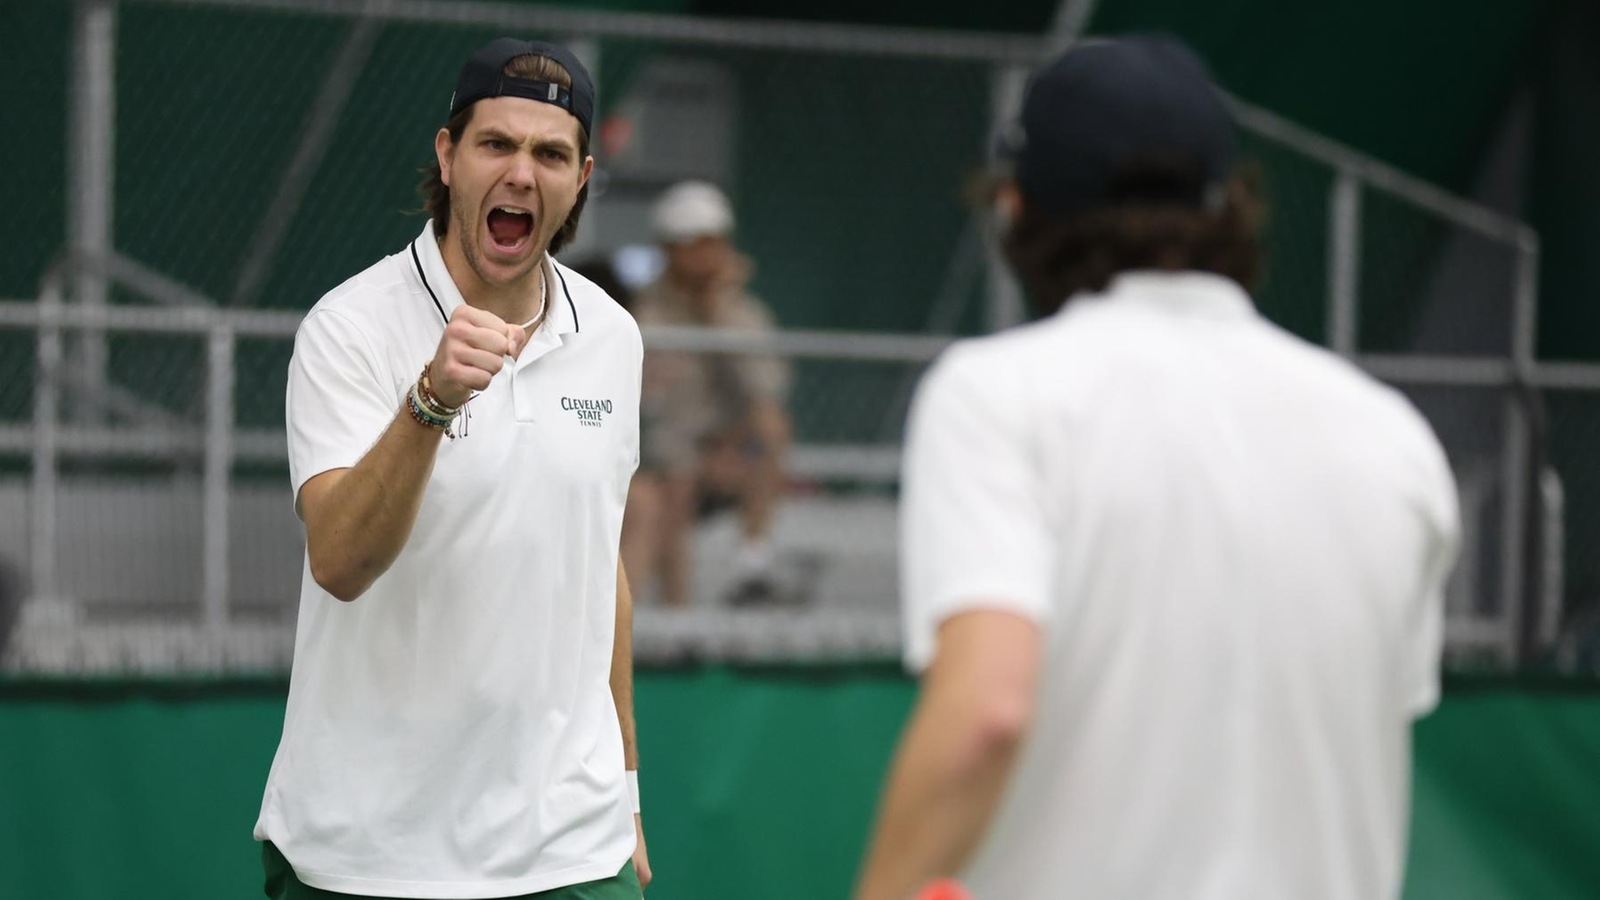 Cleveland State Men’s Tennis Earns No. 1 Seed In The North For 2024 #HLTennis Tournament